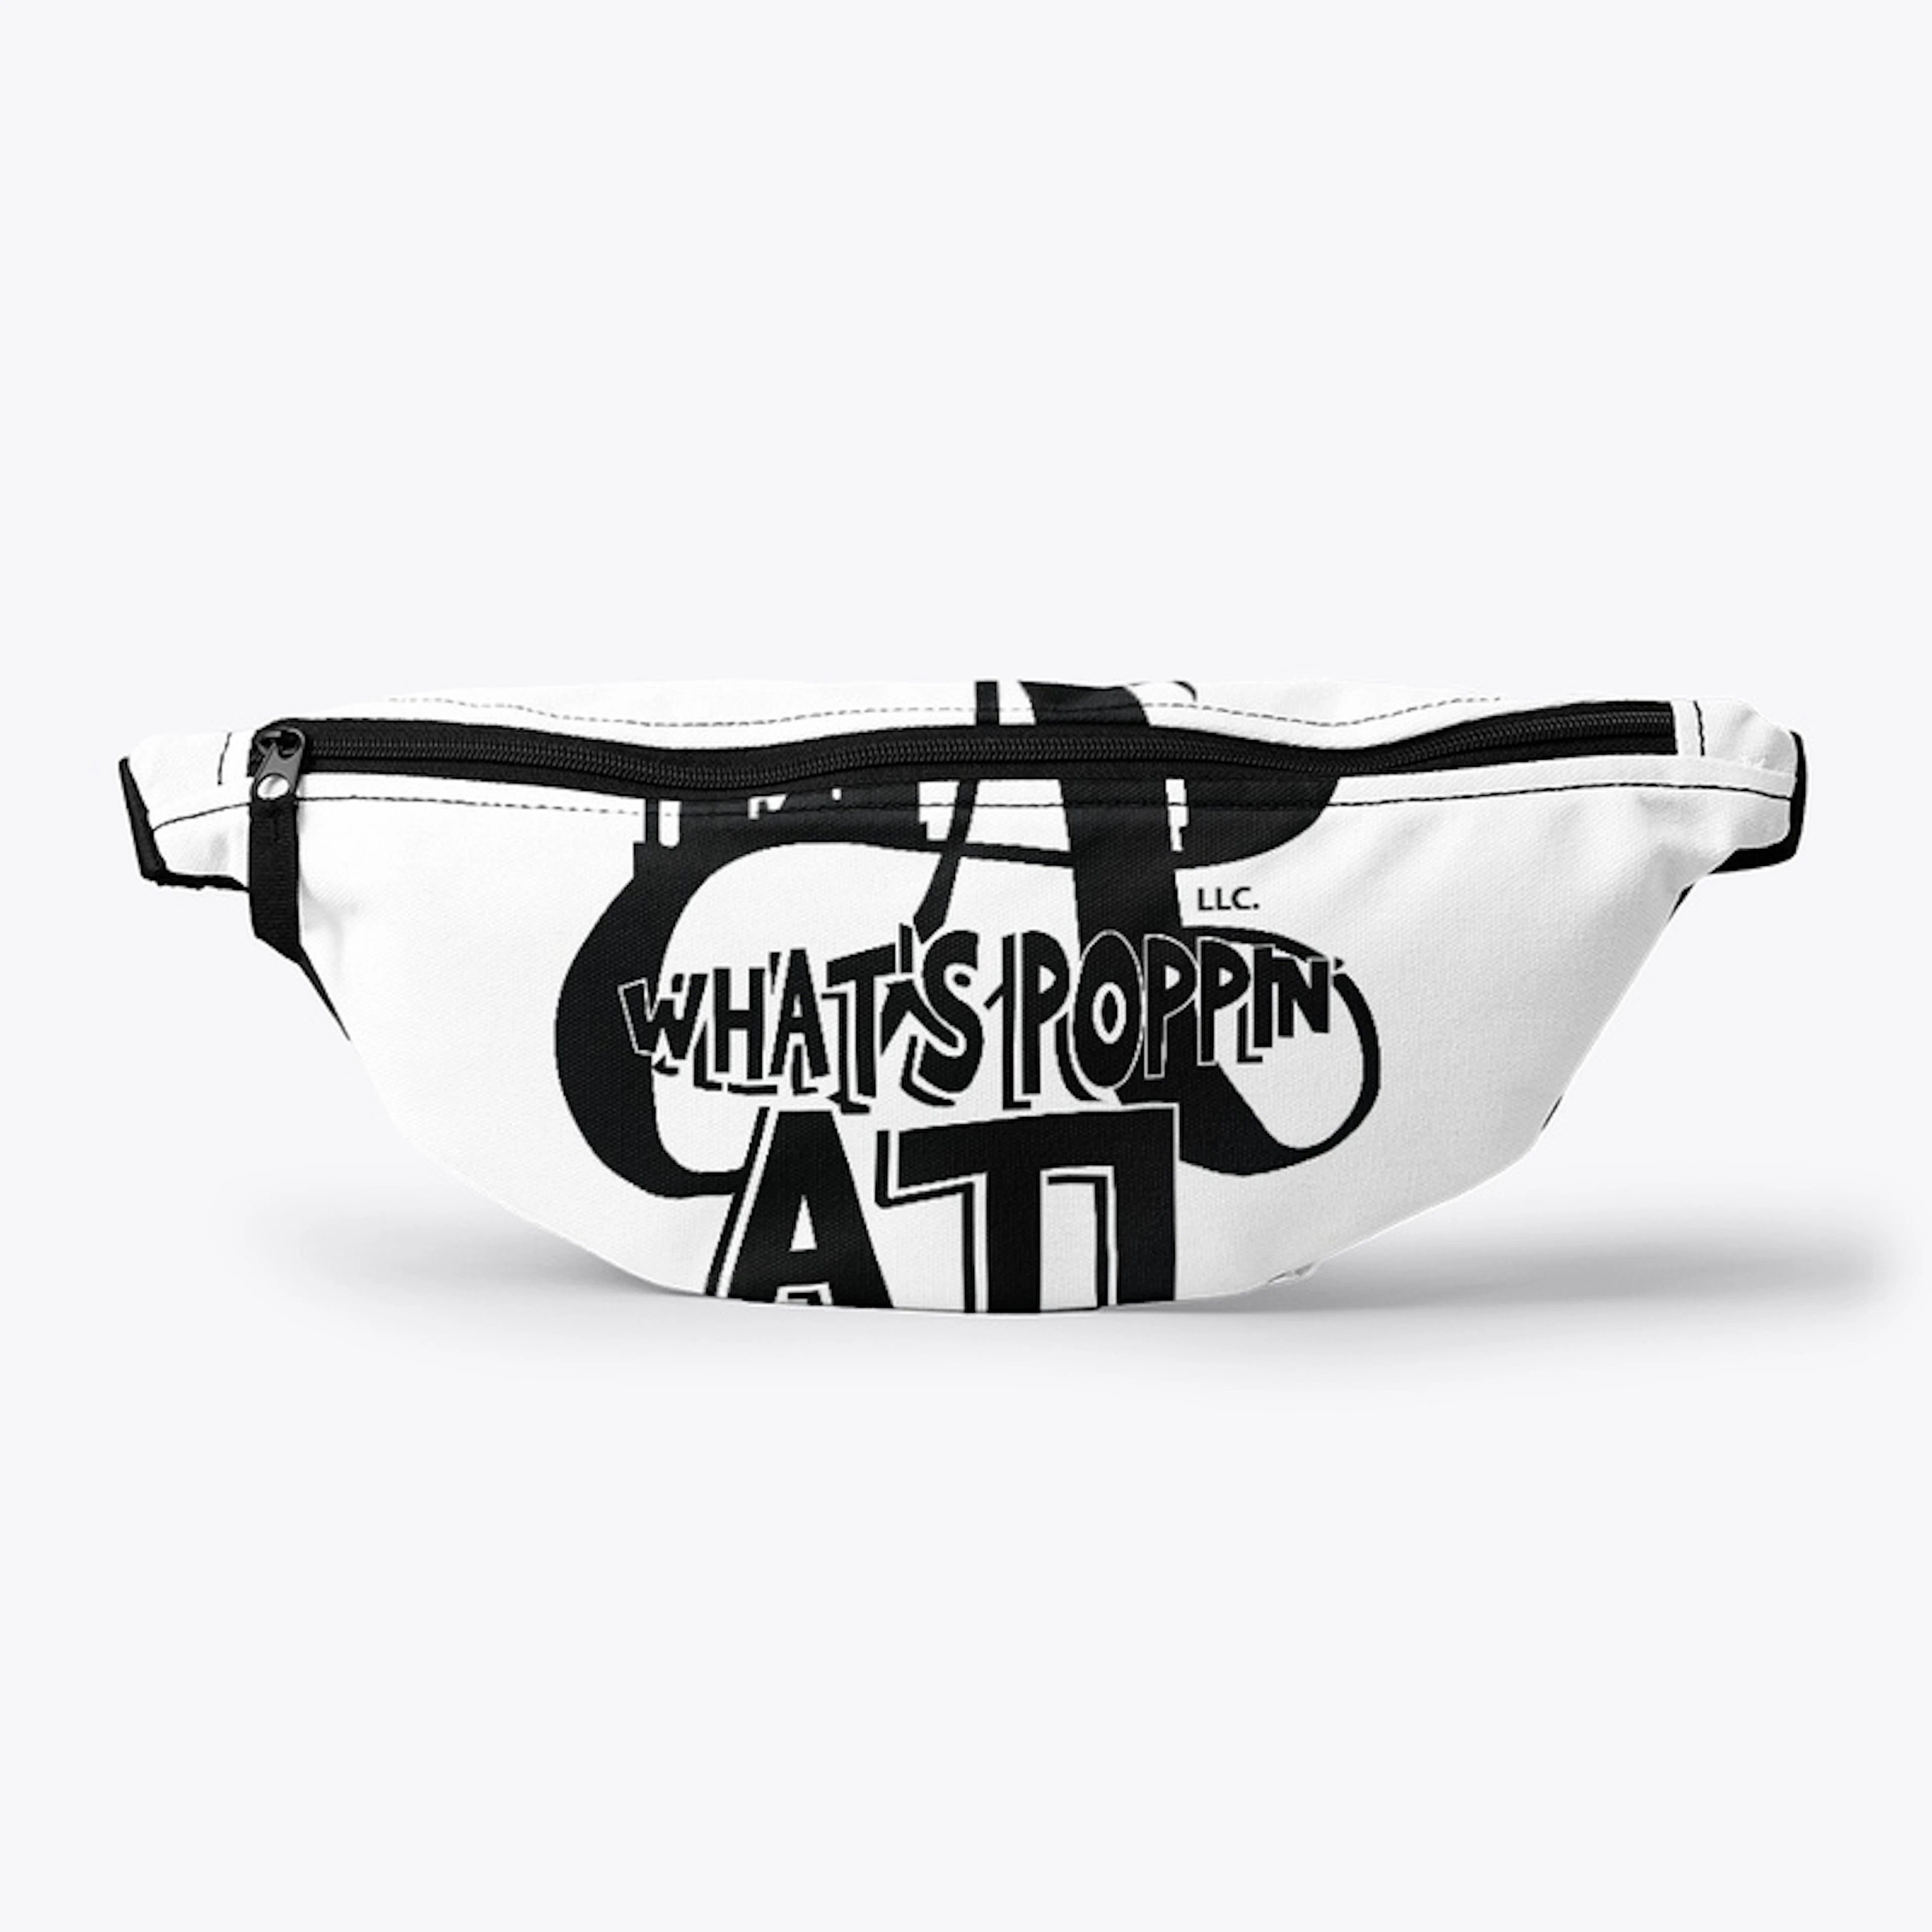 Whats Poppin Atl Apparel And Merchandise